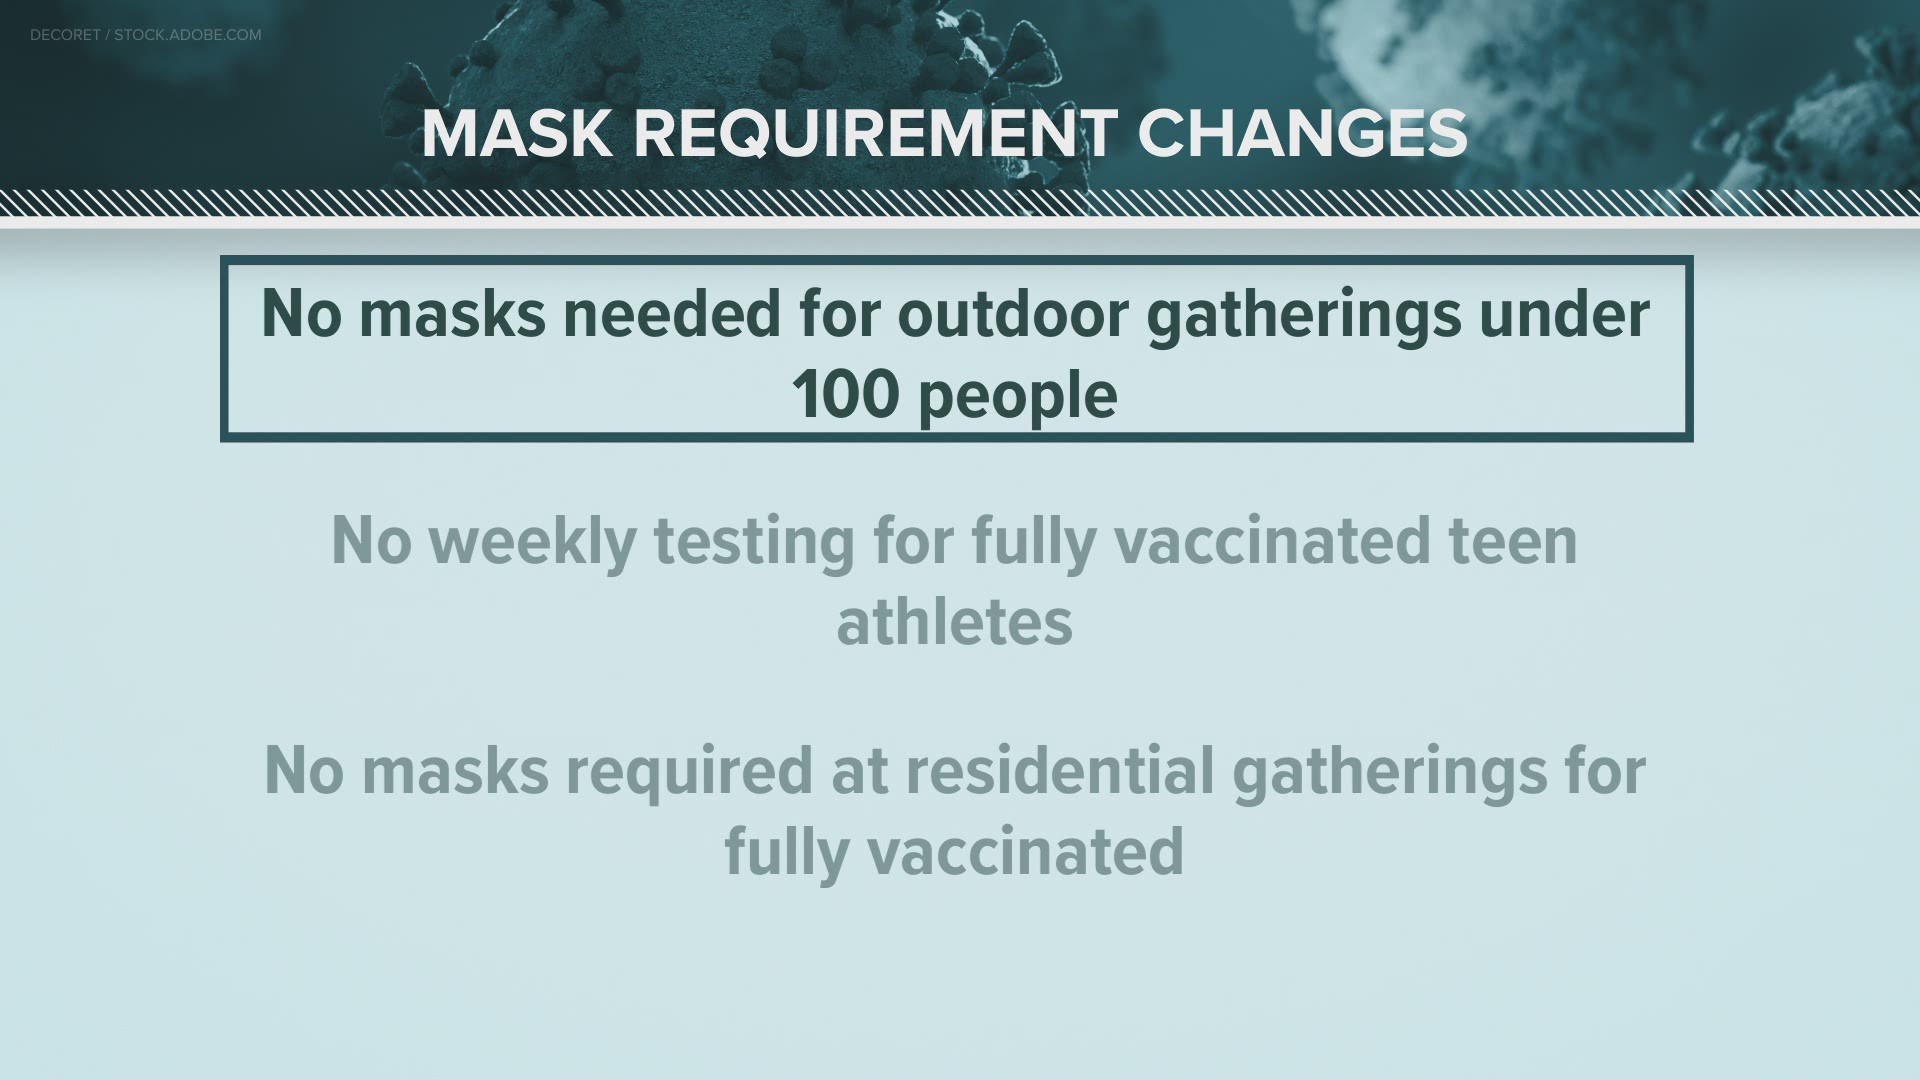 In addition, fully vaccinated people who are not experiencing symptoms are not required to wear masks at residential gatherings.